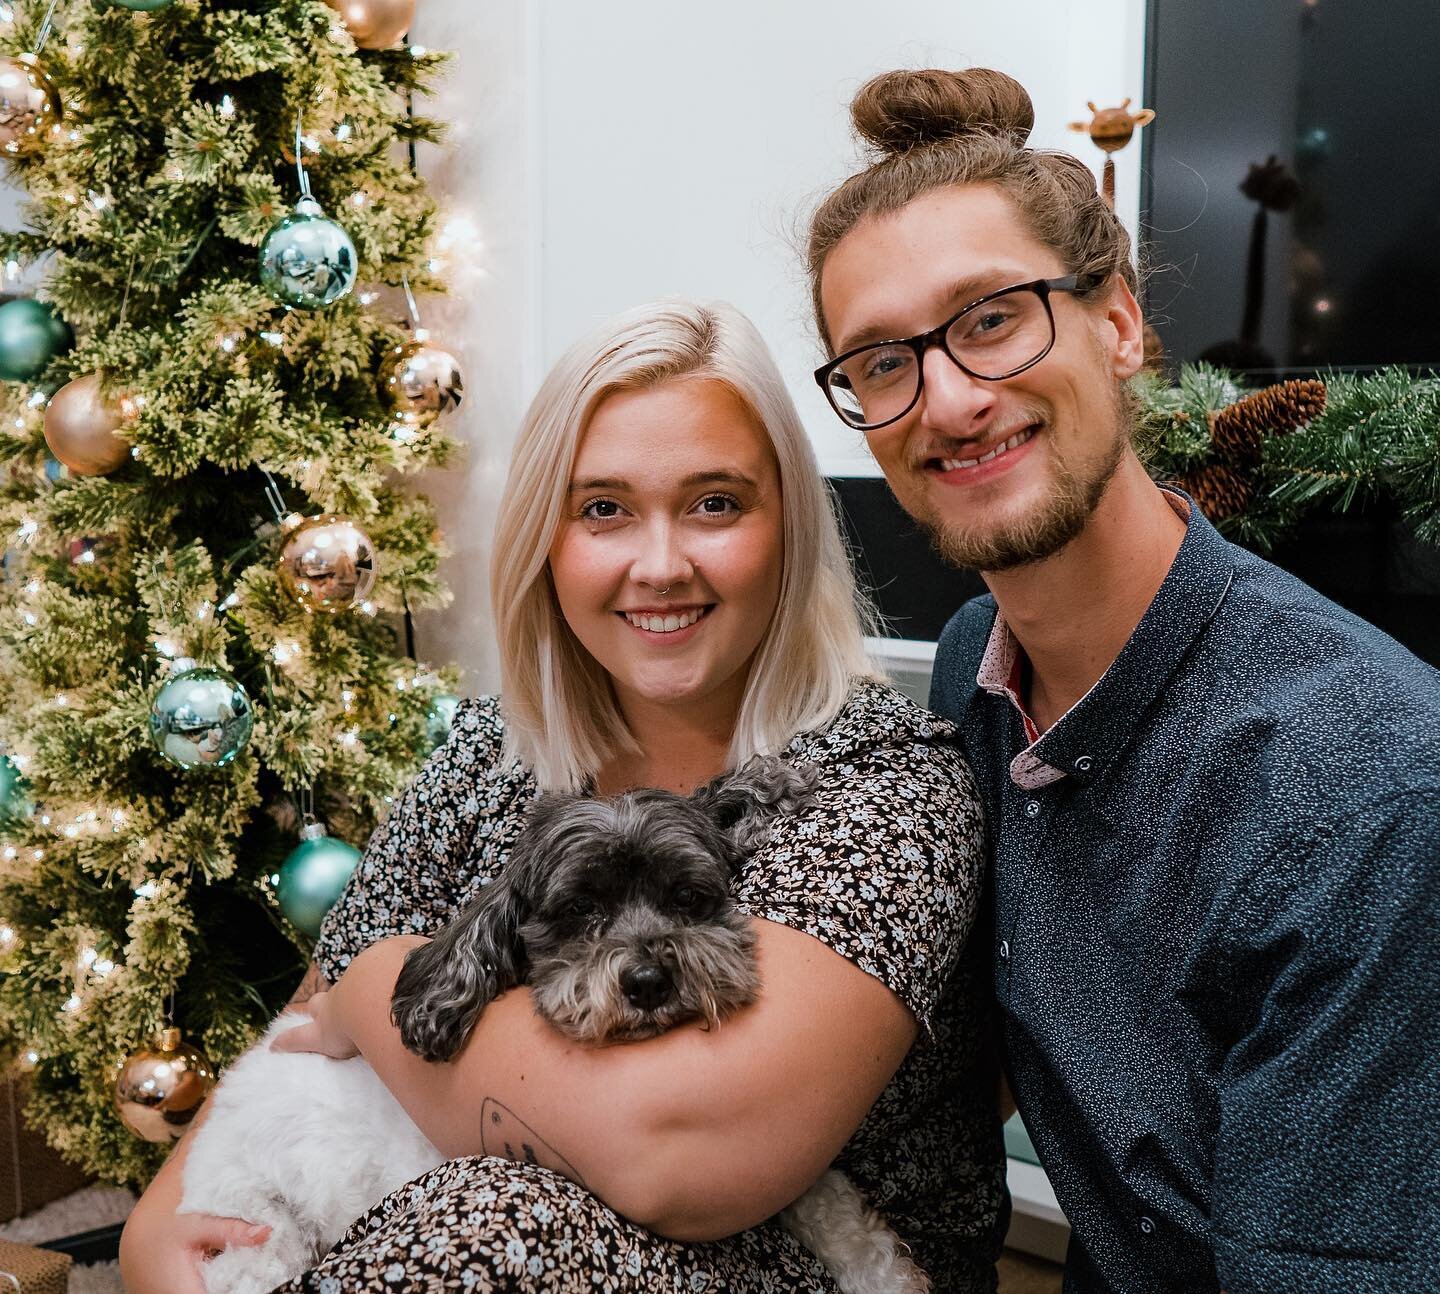 I put on makeup for the first time since covid sooooooo we obviously had to make a photo shoot out of it 💃🏼🥰 cute lil family Christmas family photo! Suki looks so unimpressed 😂